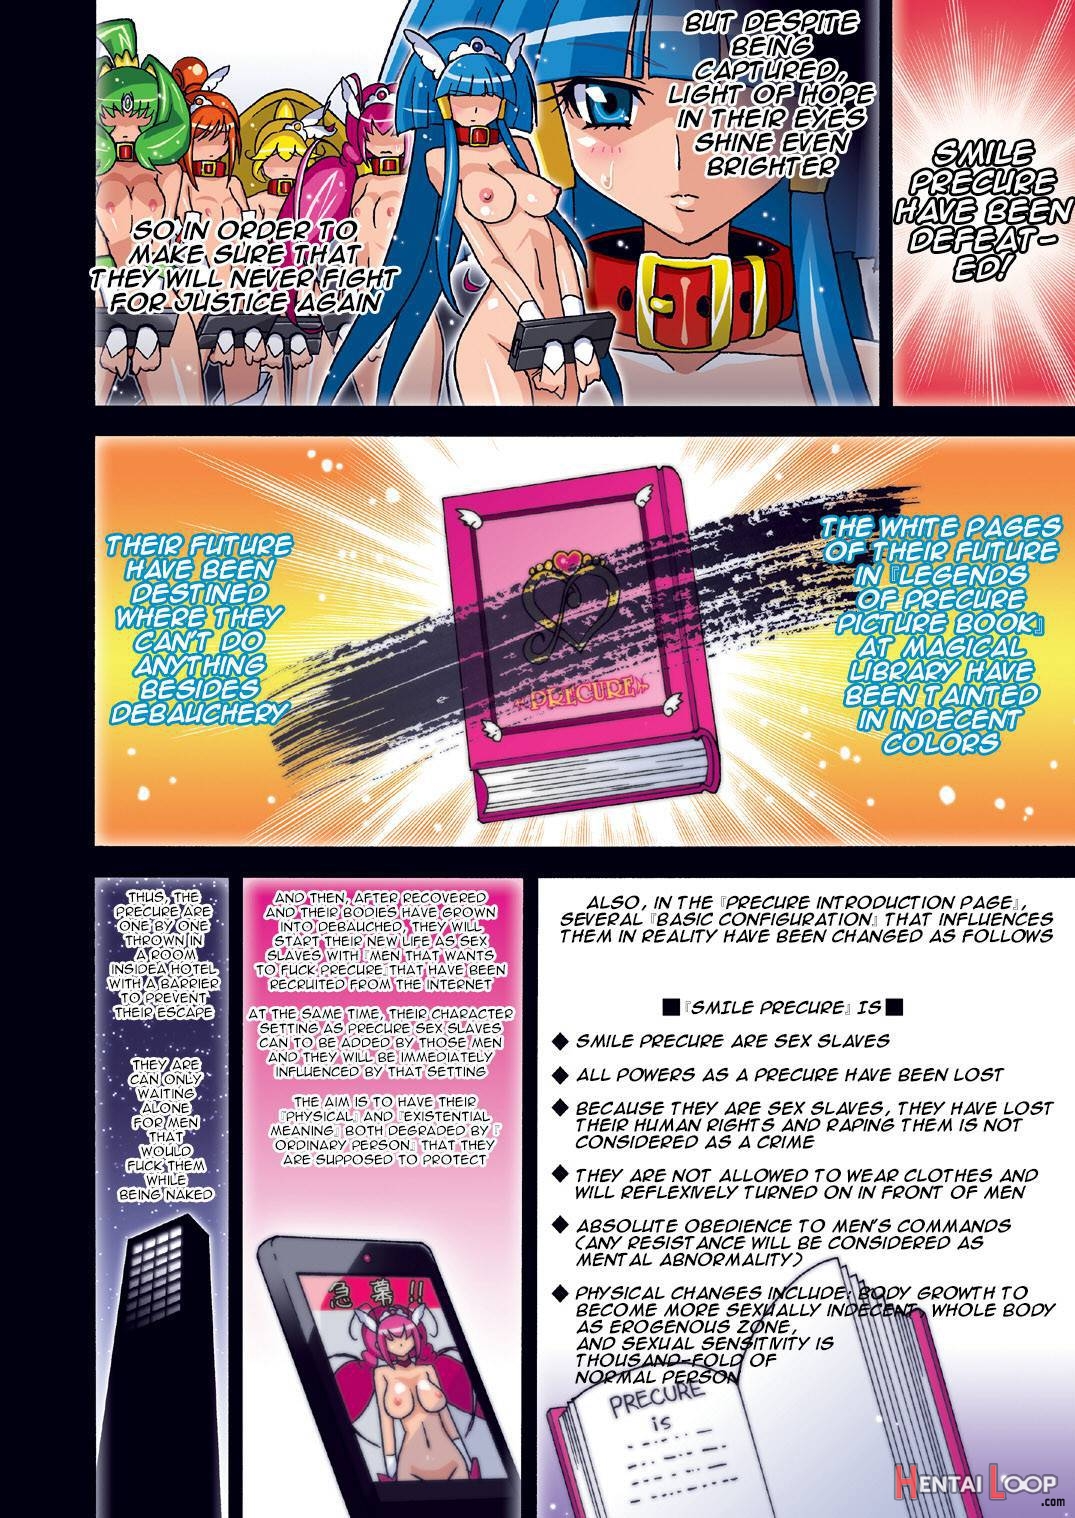 BEAUTY FULL LIFE DL page 2